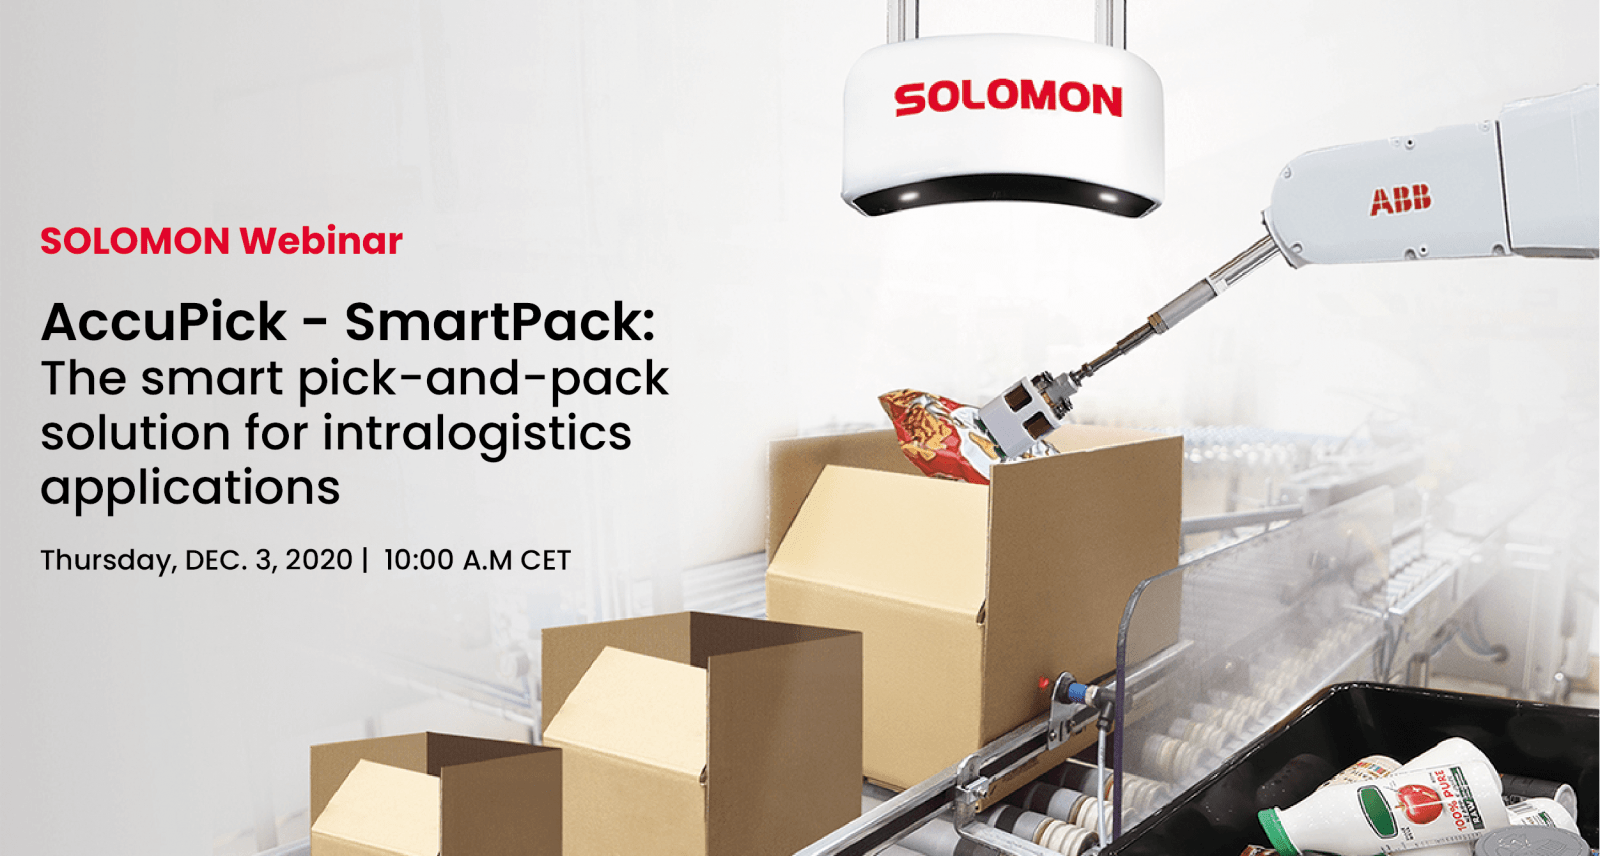 SOLOMON webinar_ AccuPick – SmartPack The smart pick and pack solution for intralogistics applications